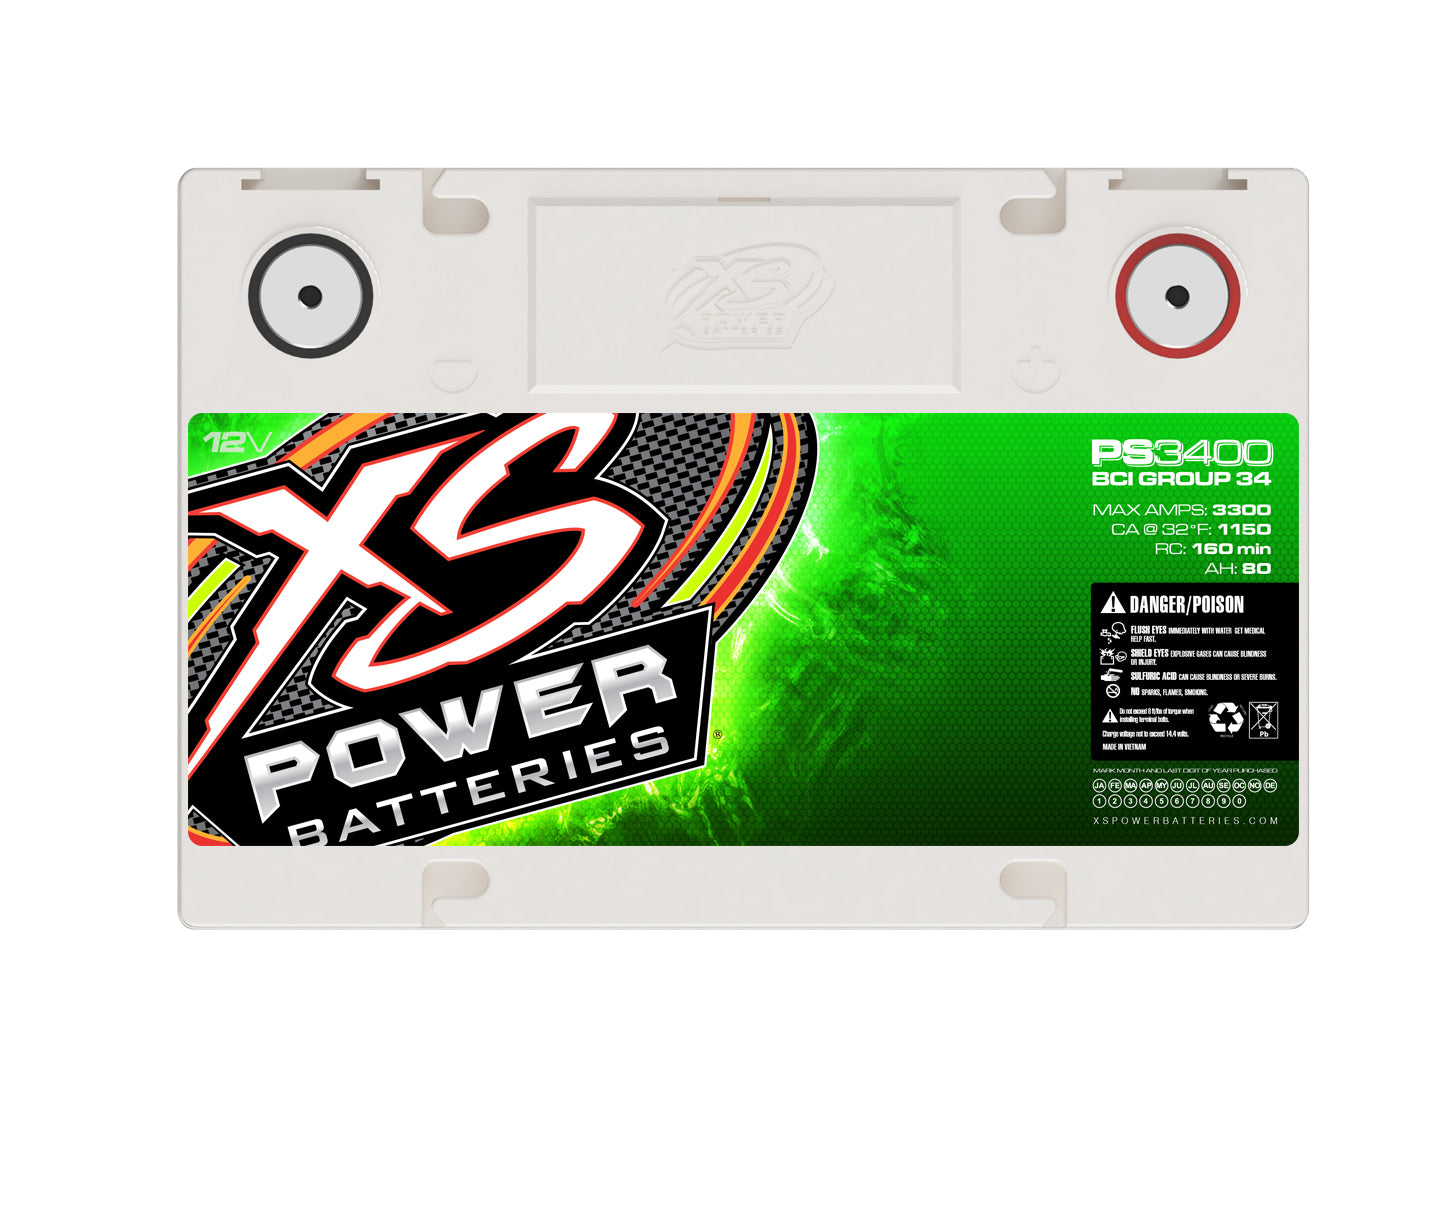 PS3400 XS Power 12VDC Group 34 AGM Powersports Battery 3300A 80Ah